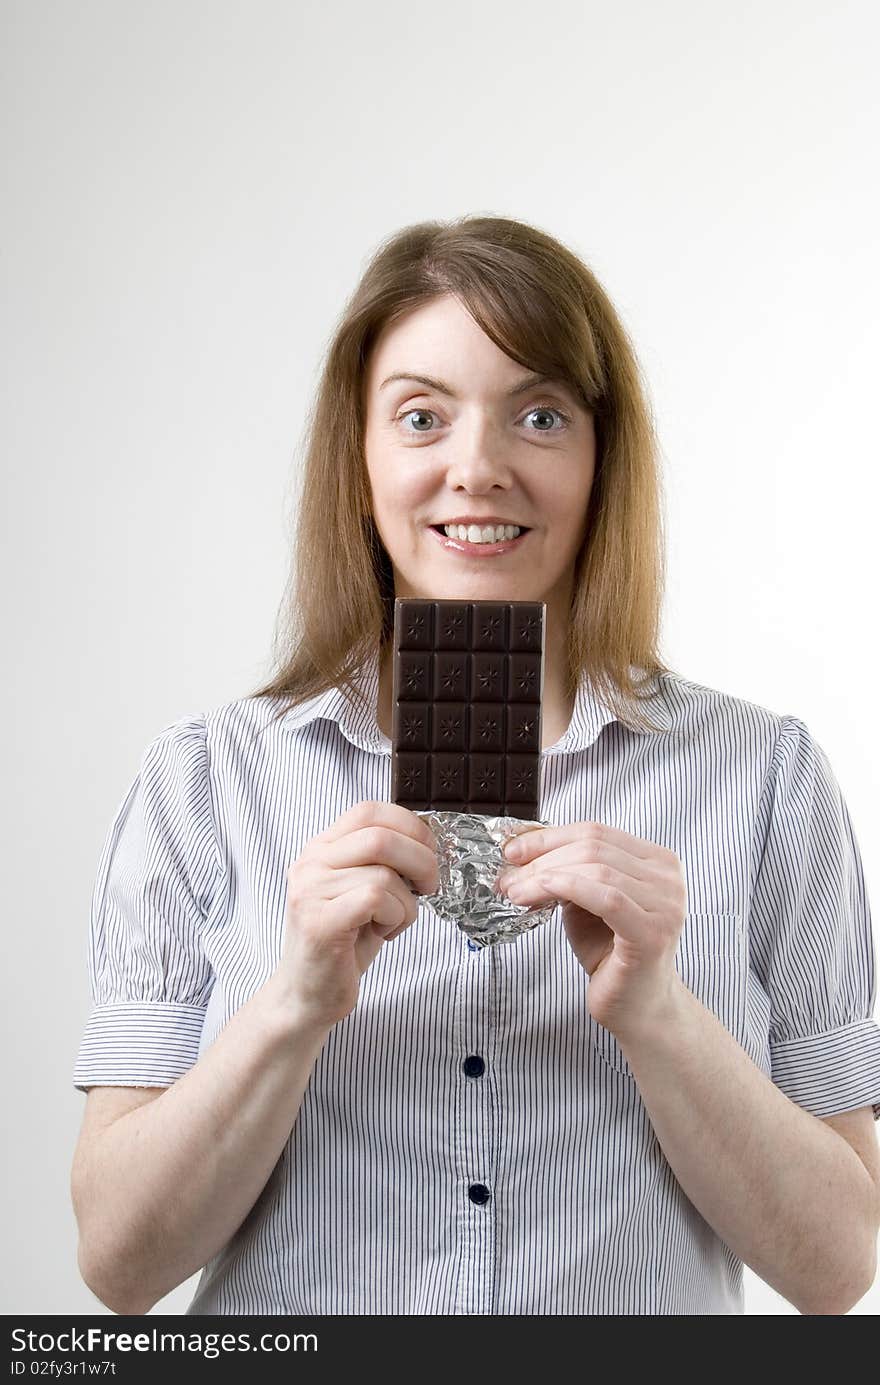 A vertical image of a pretty young woman smiling with a large bar of chocolate in her hand preparing to enjoy her treat. A vertical image of a pretty young woman smiling with a large bar of chocolate in her hand preparing to enjoy her treat